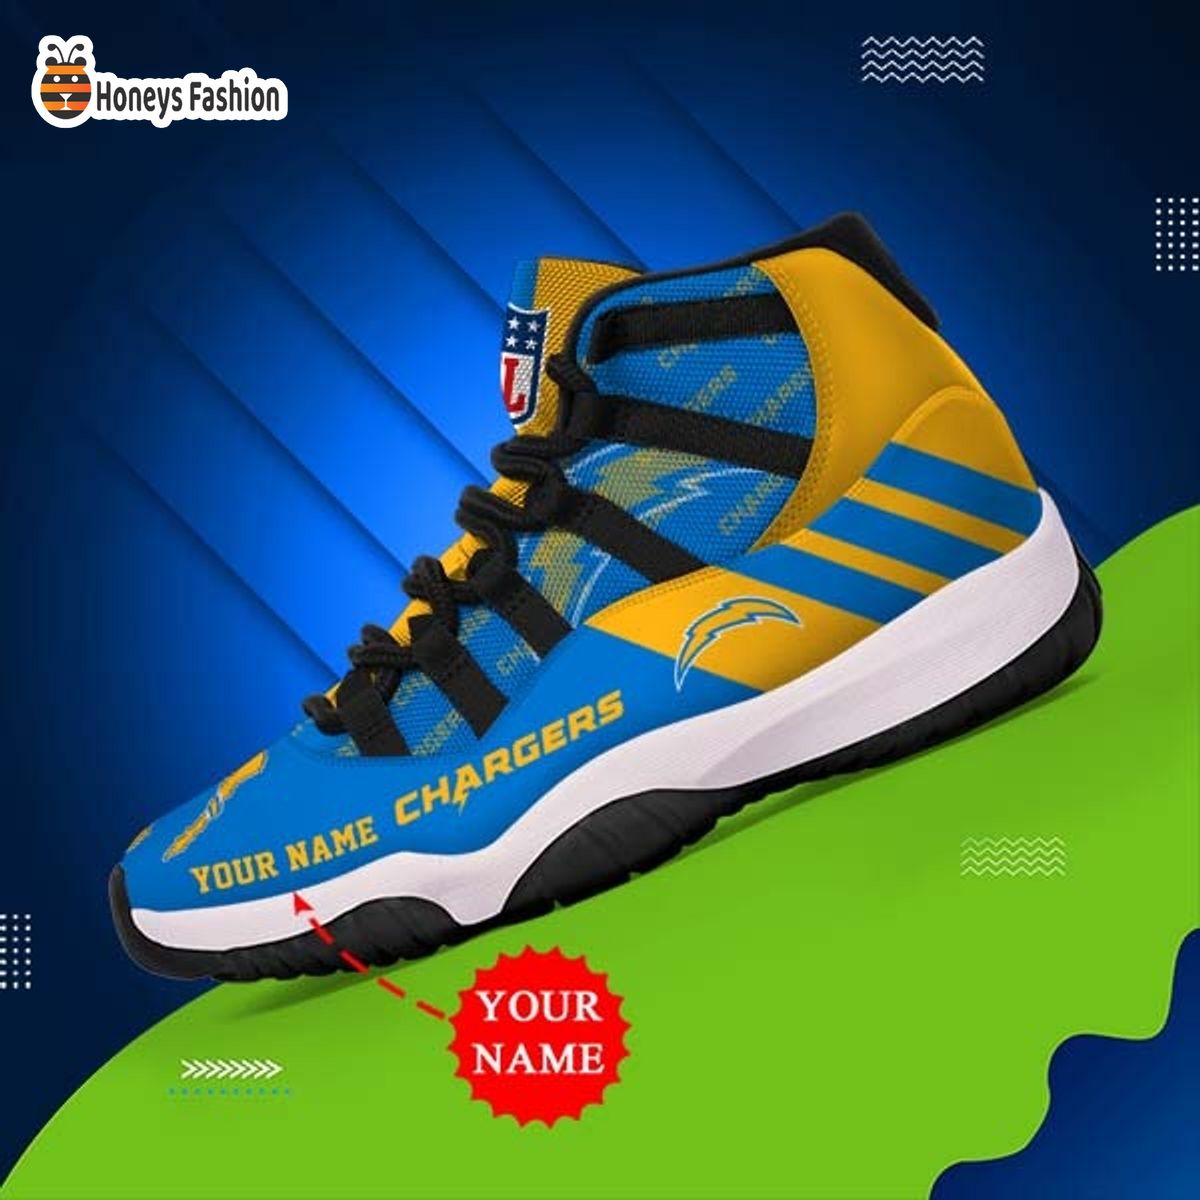 Los Angeles Chargers NFL Adidas Personalized Air Jordan 11 Shoes